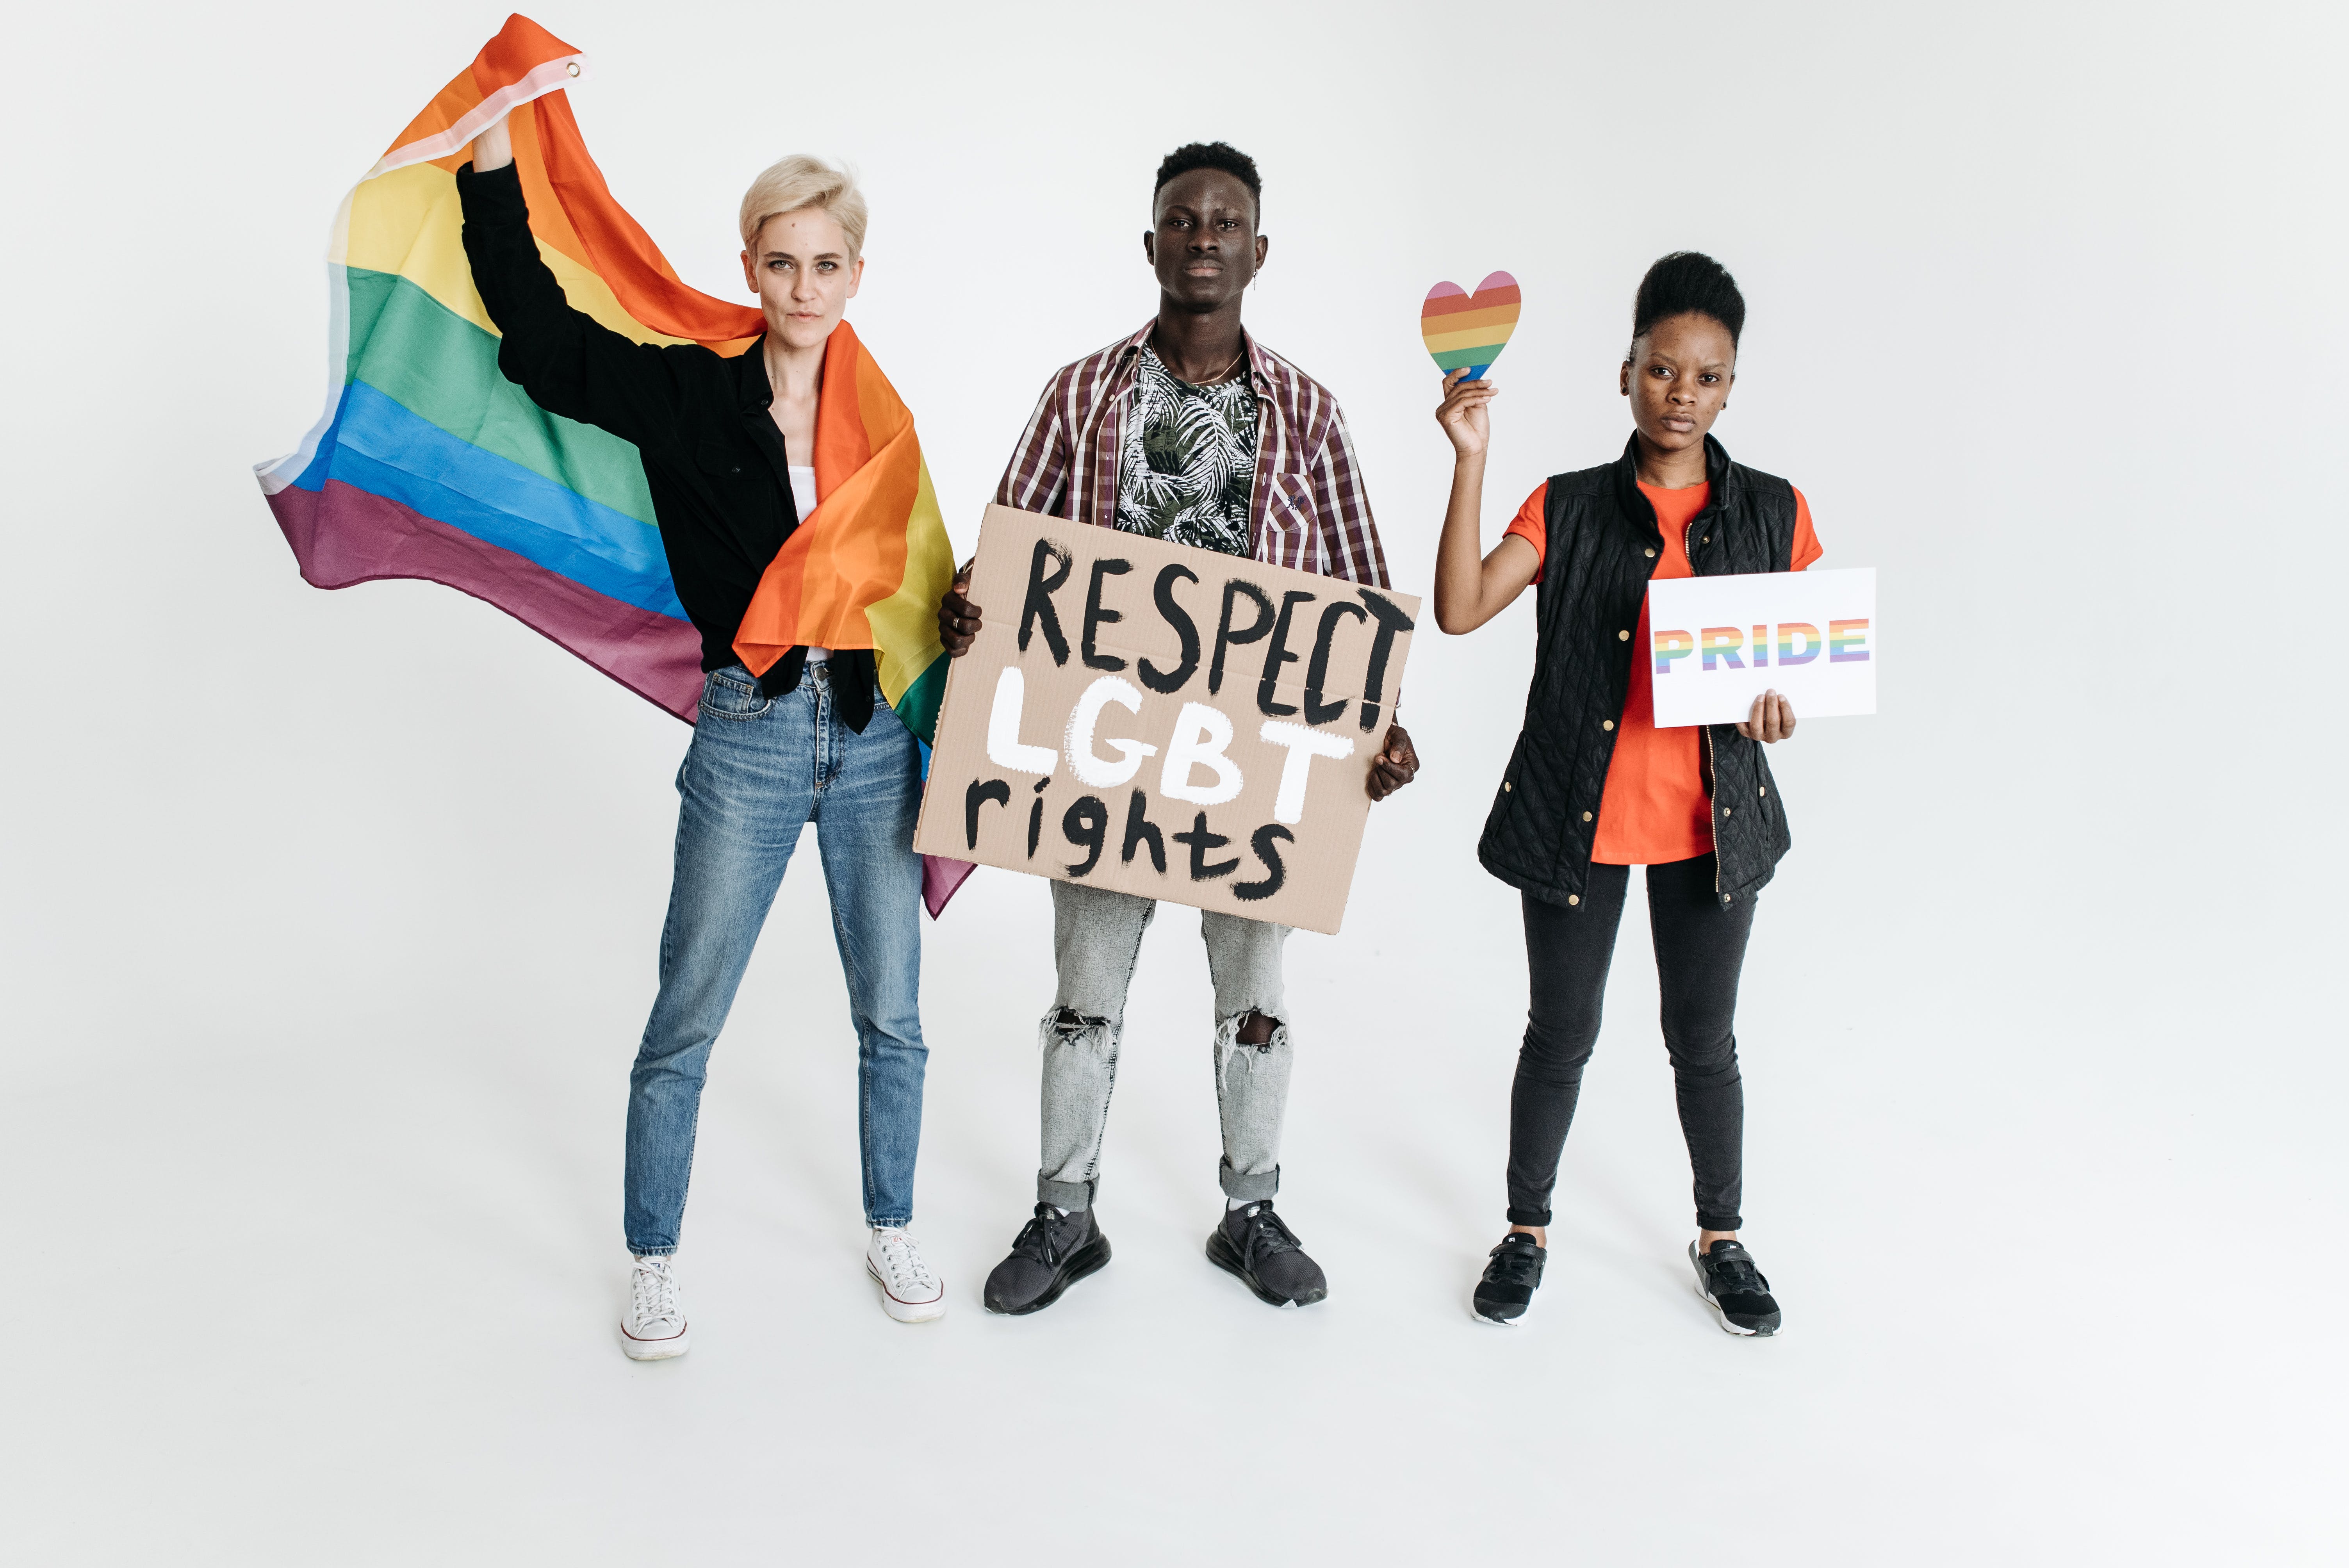 A photo featuring three people standing against a white background advocating for LGBTQ rights. On the left, a white woman with short blonde hair holds a large rainbow flag in the air with her right hand, with it draped over her left shoulder. In the centre, a black man holds a sign reading "Respect LGBT rights," and on the right, a black woman with short black hair holds a small rainbow heart in her right hand and a sign with the word "PRIDE" in rainbow colours in her left hand.